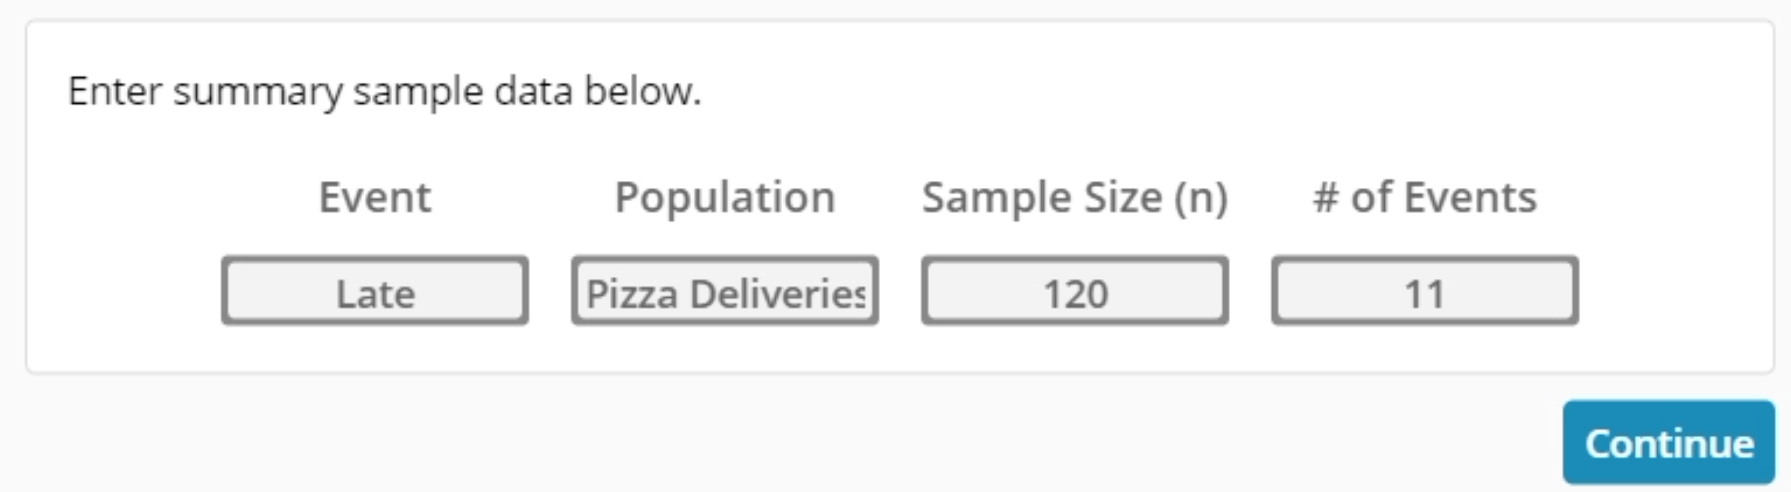 Pop up to enter summary sample data.